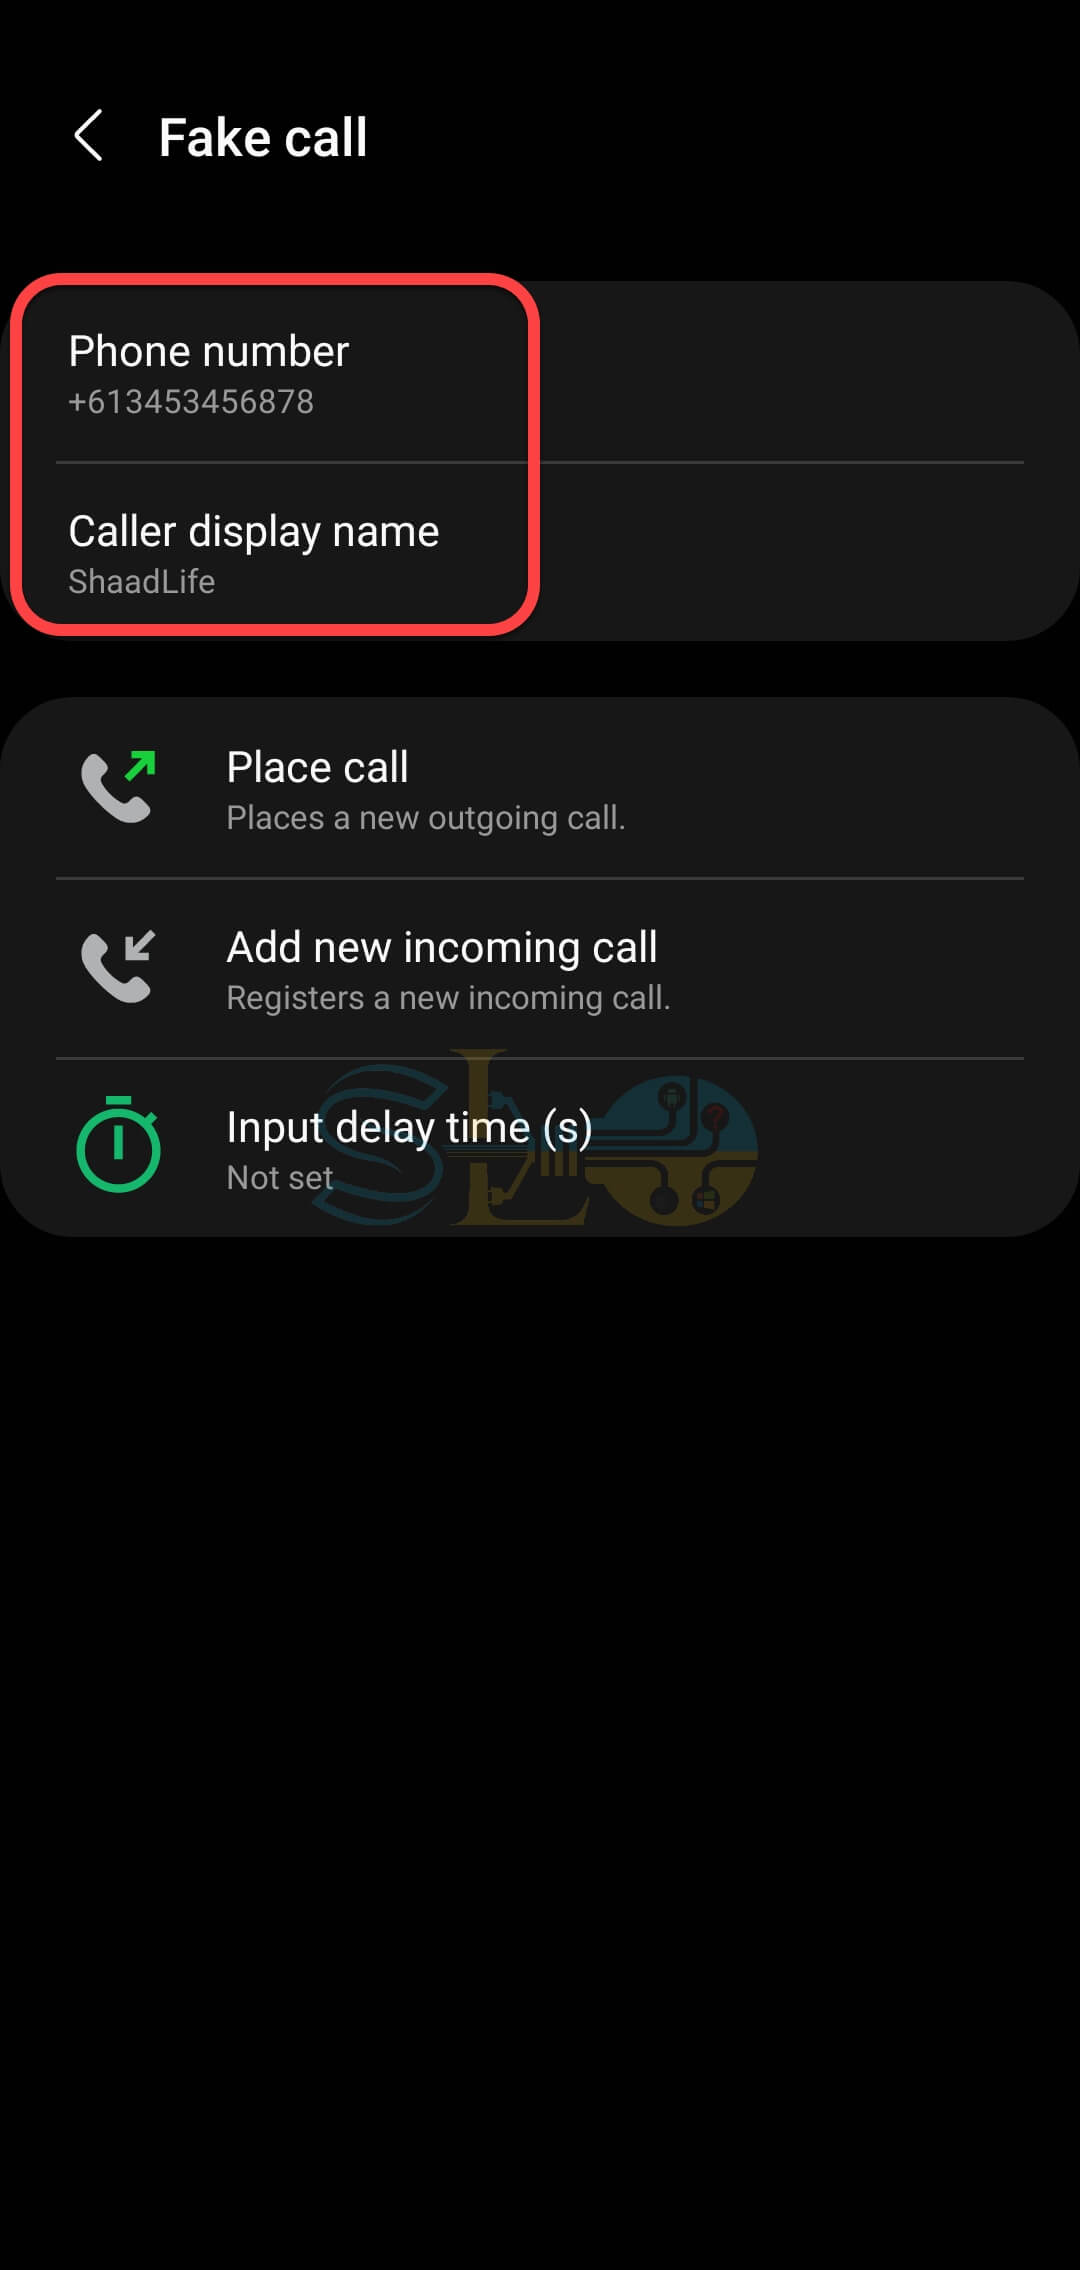 How to Activate Fake Call on Samsung Galaxy [Outgoing & Incoming Calls]